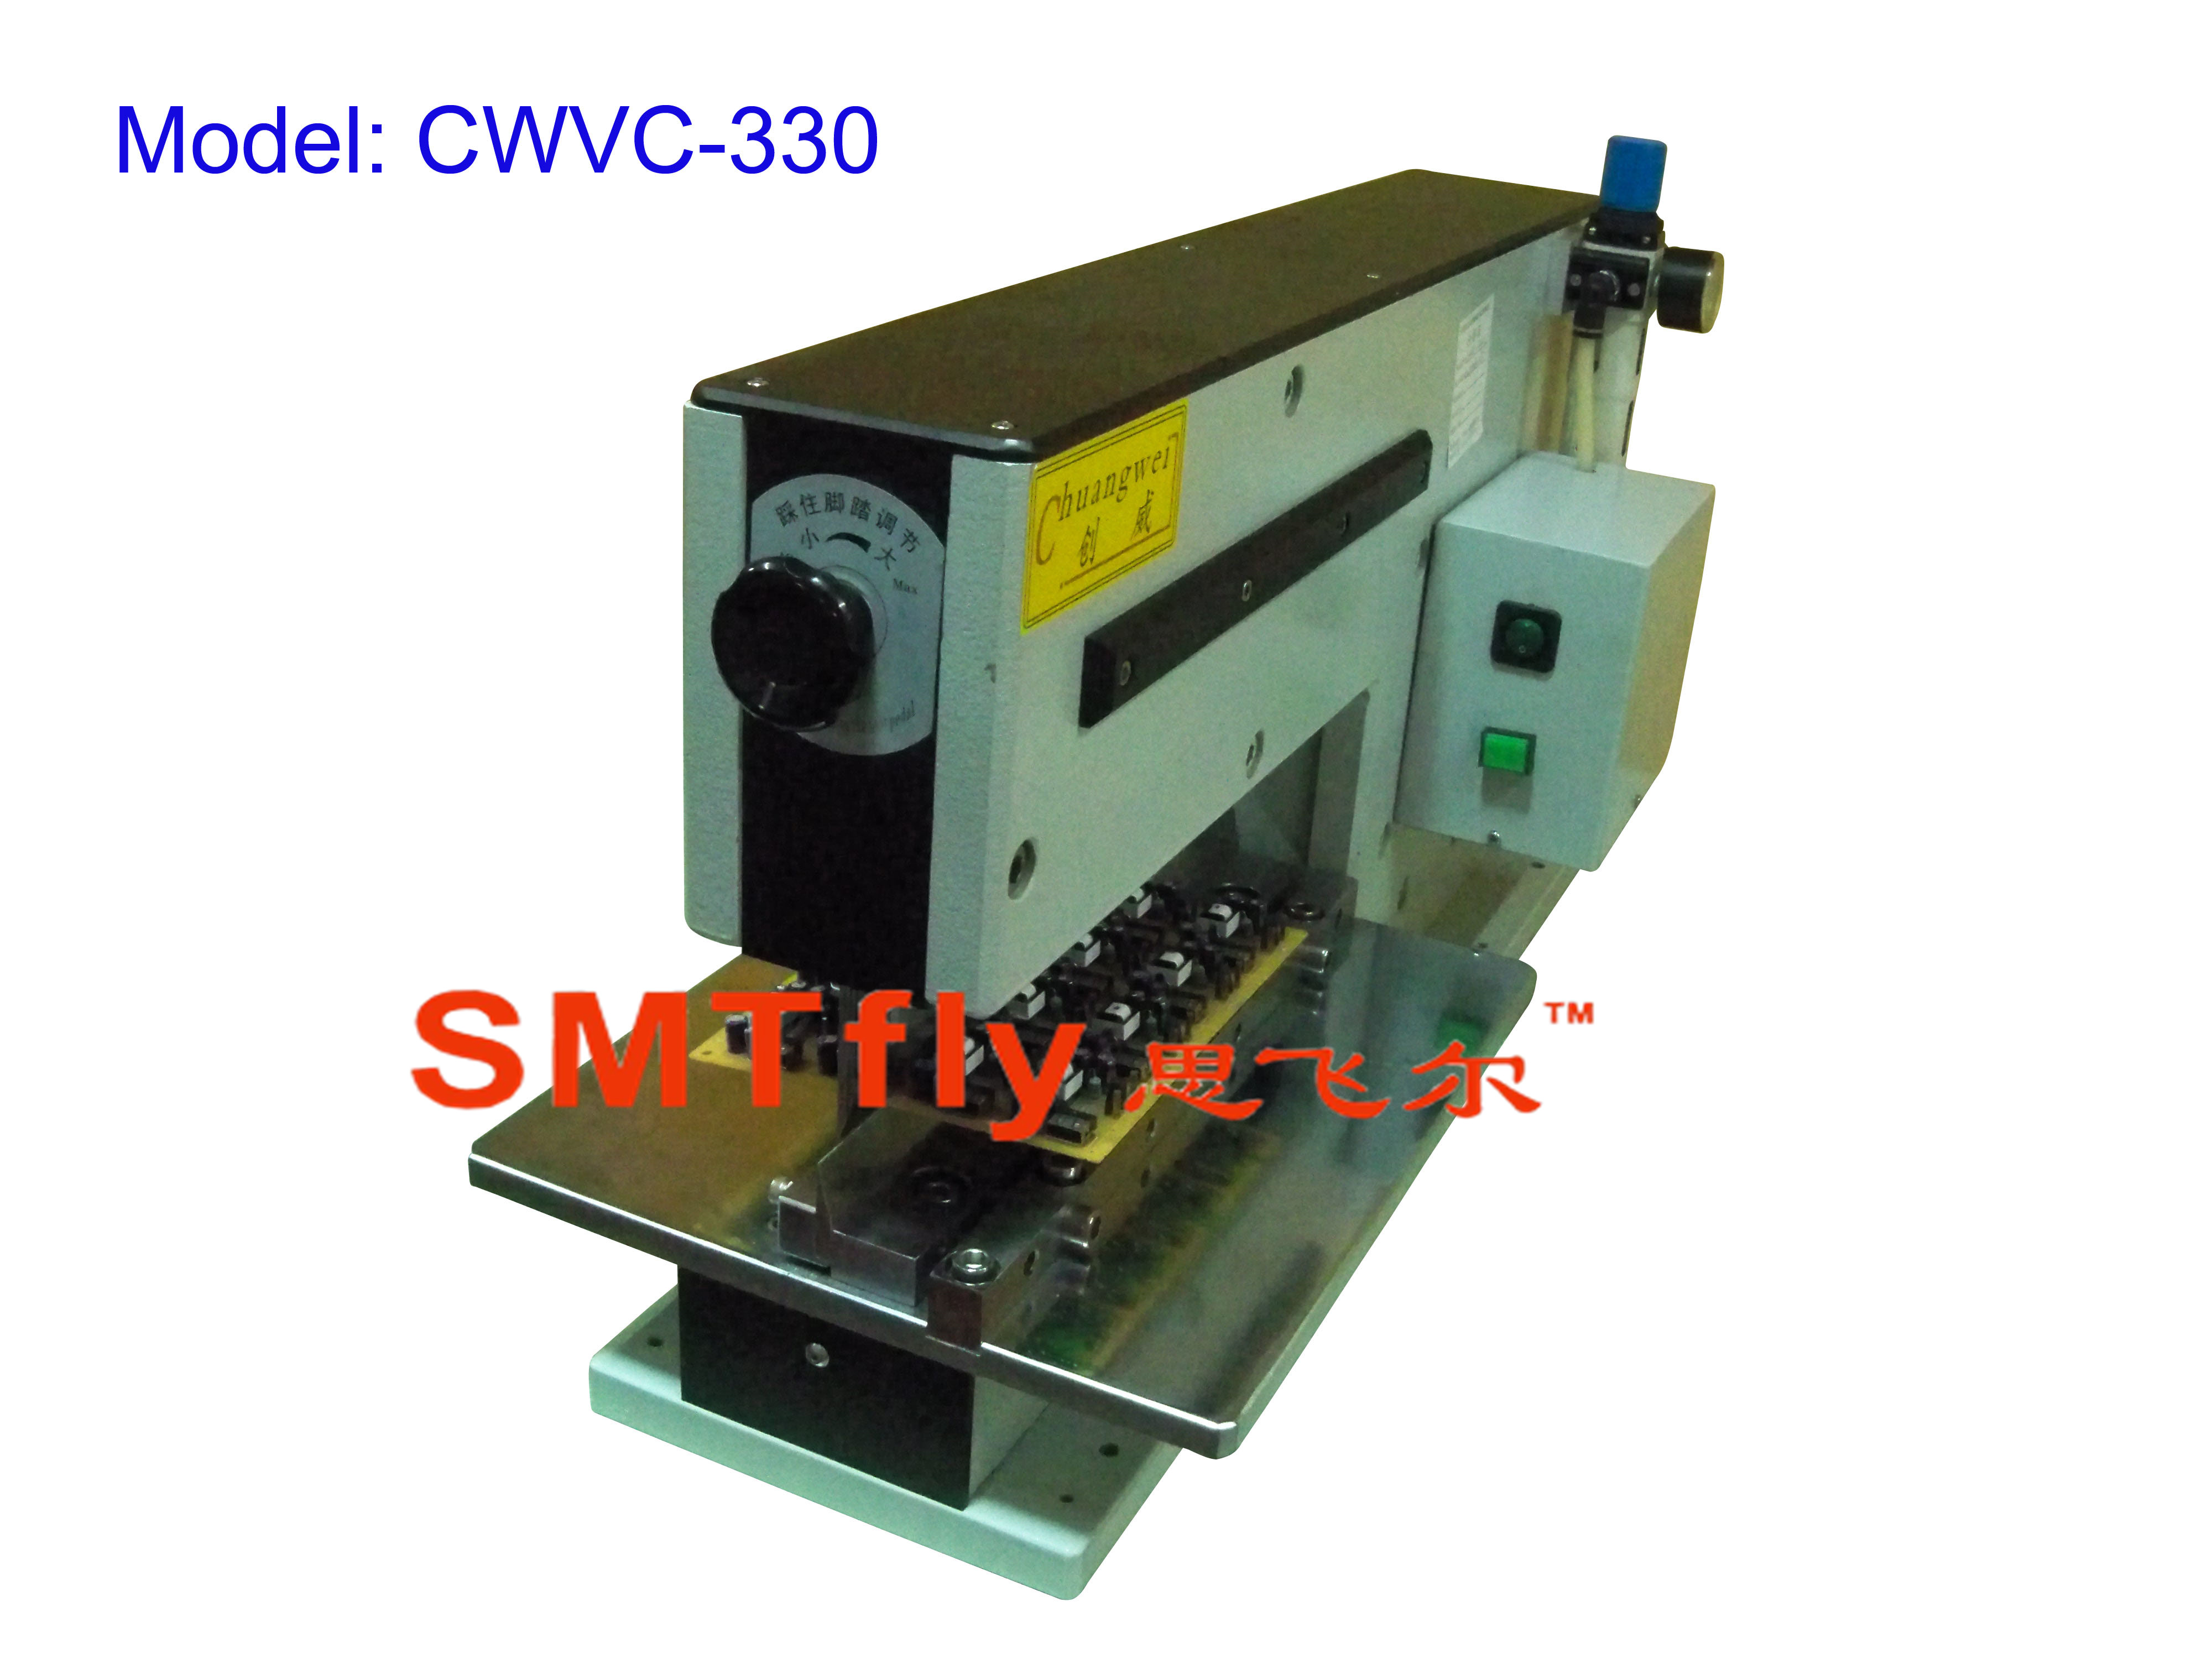 Guillotine for Cutting PCB Board,SMTfly-330J